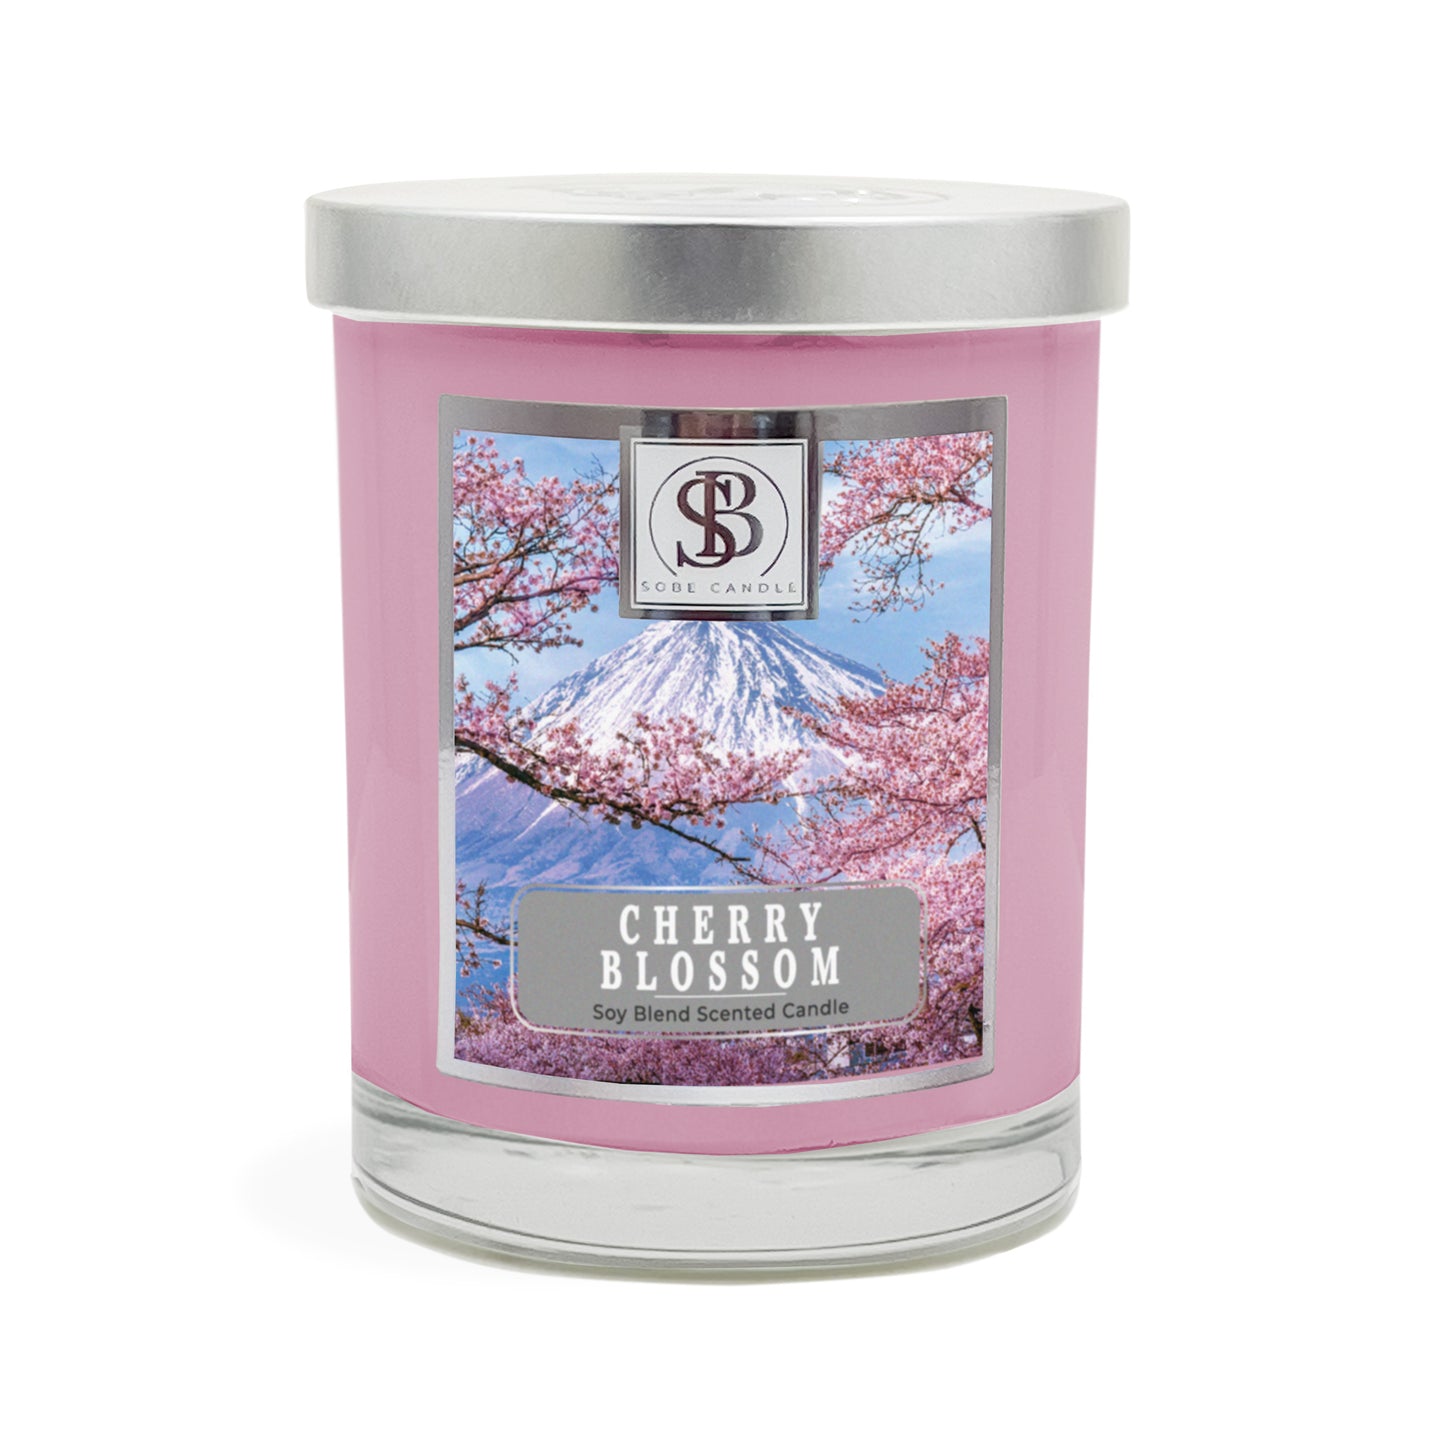 CHERRY BLOSSOM | Soy Scented Candle 11 oz